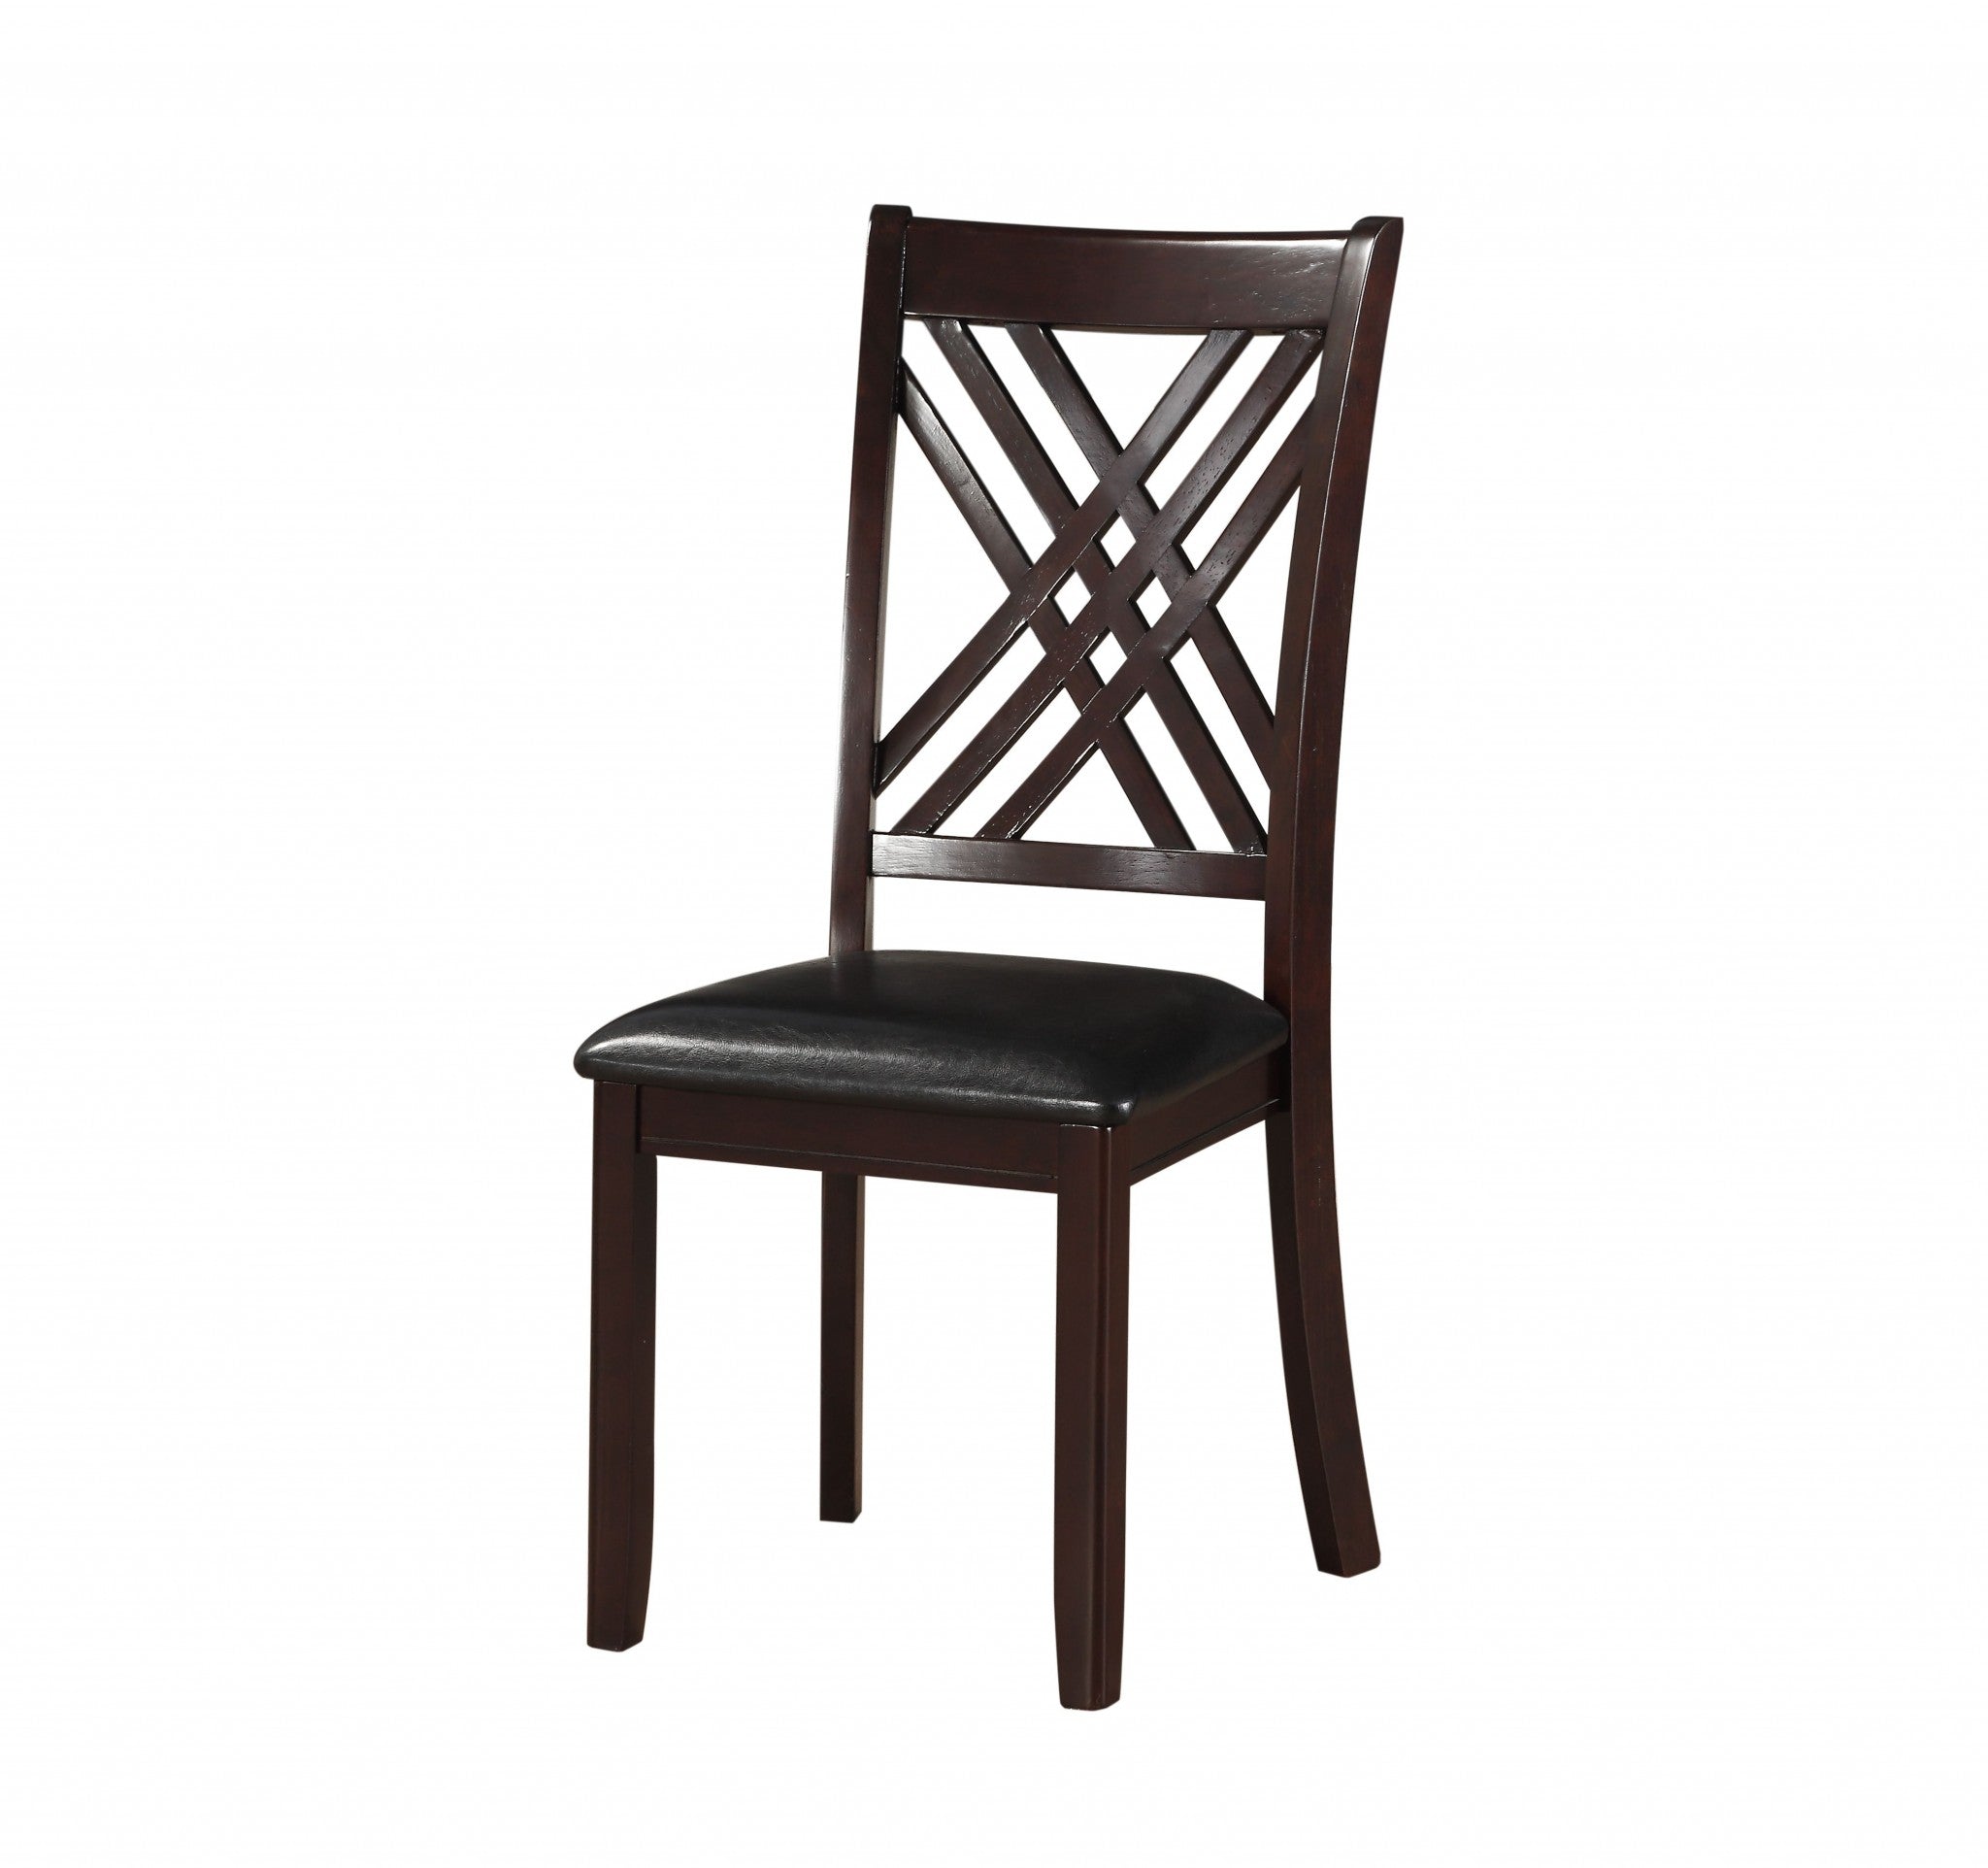 18" X 22" X 41" 2Pc Black And Espresso Side Chair